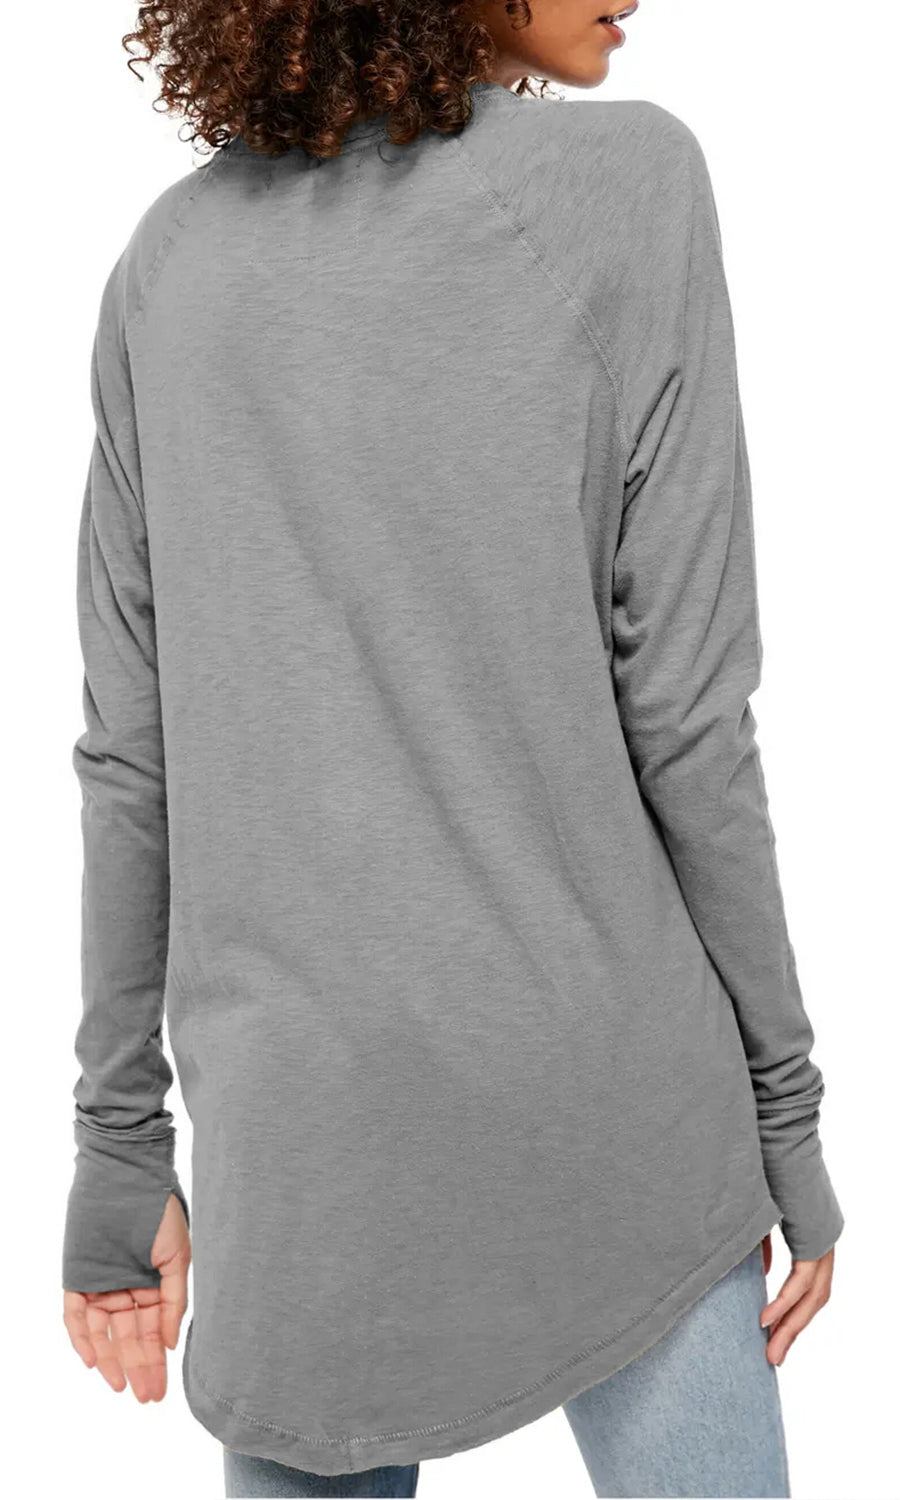 Fisoew Women's Casual Long Sleeve Tops Crew Neck Round Hem Loose T-Shirts Tunic Tops with Thumb Holes